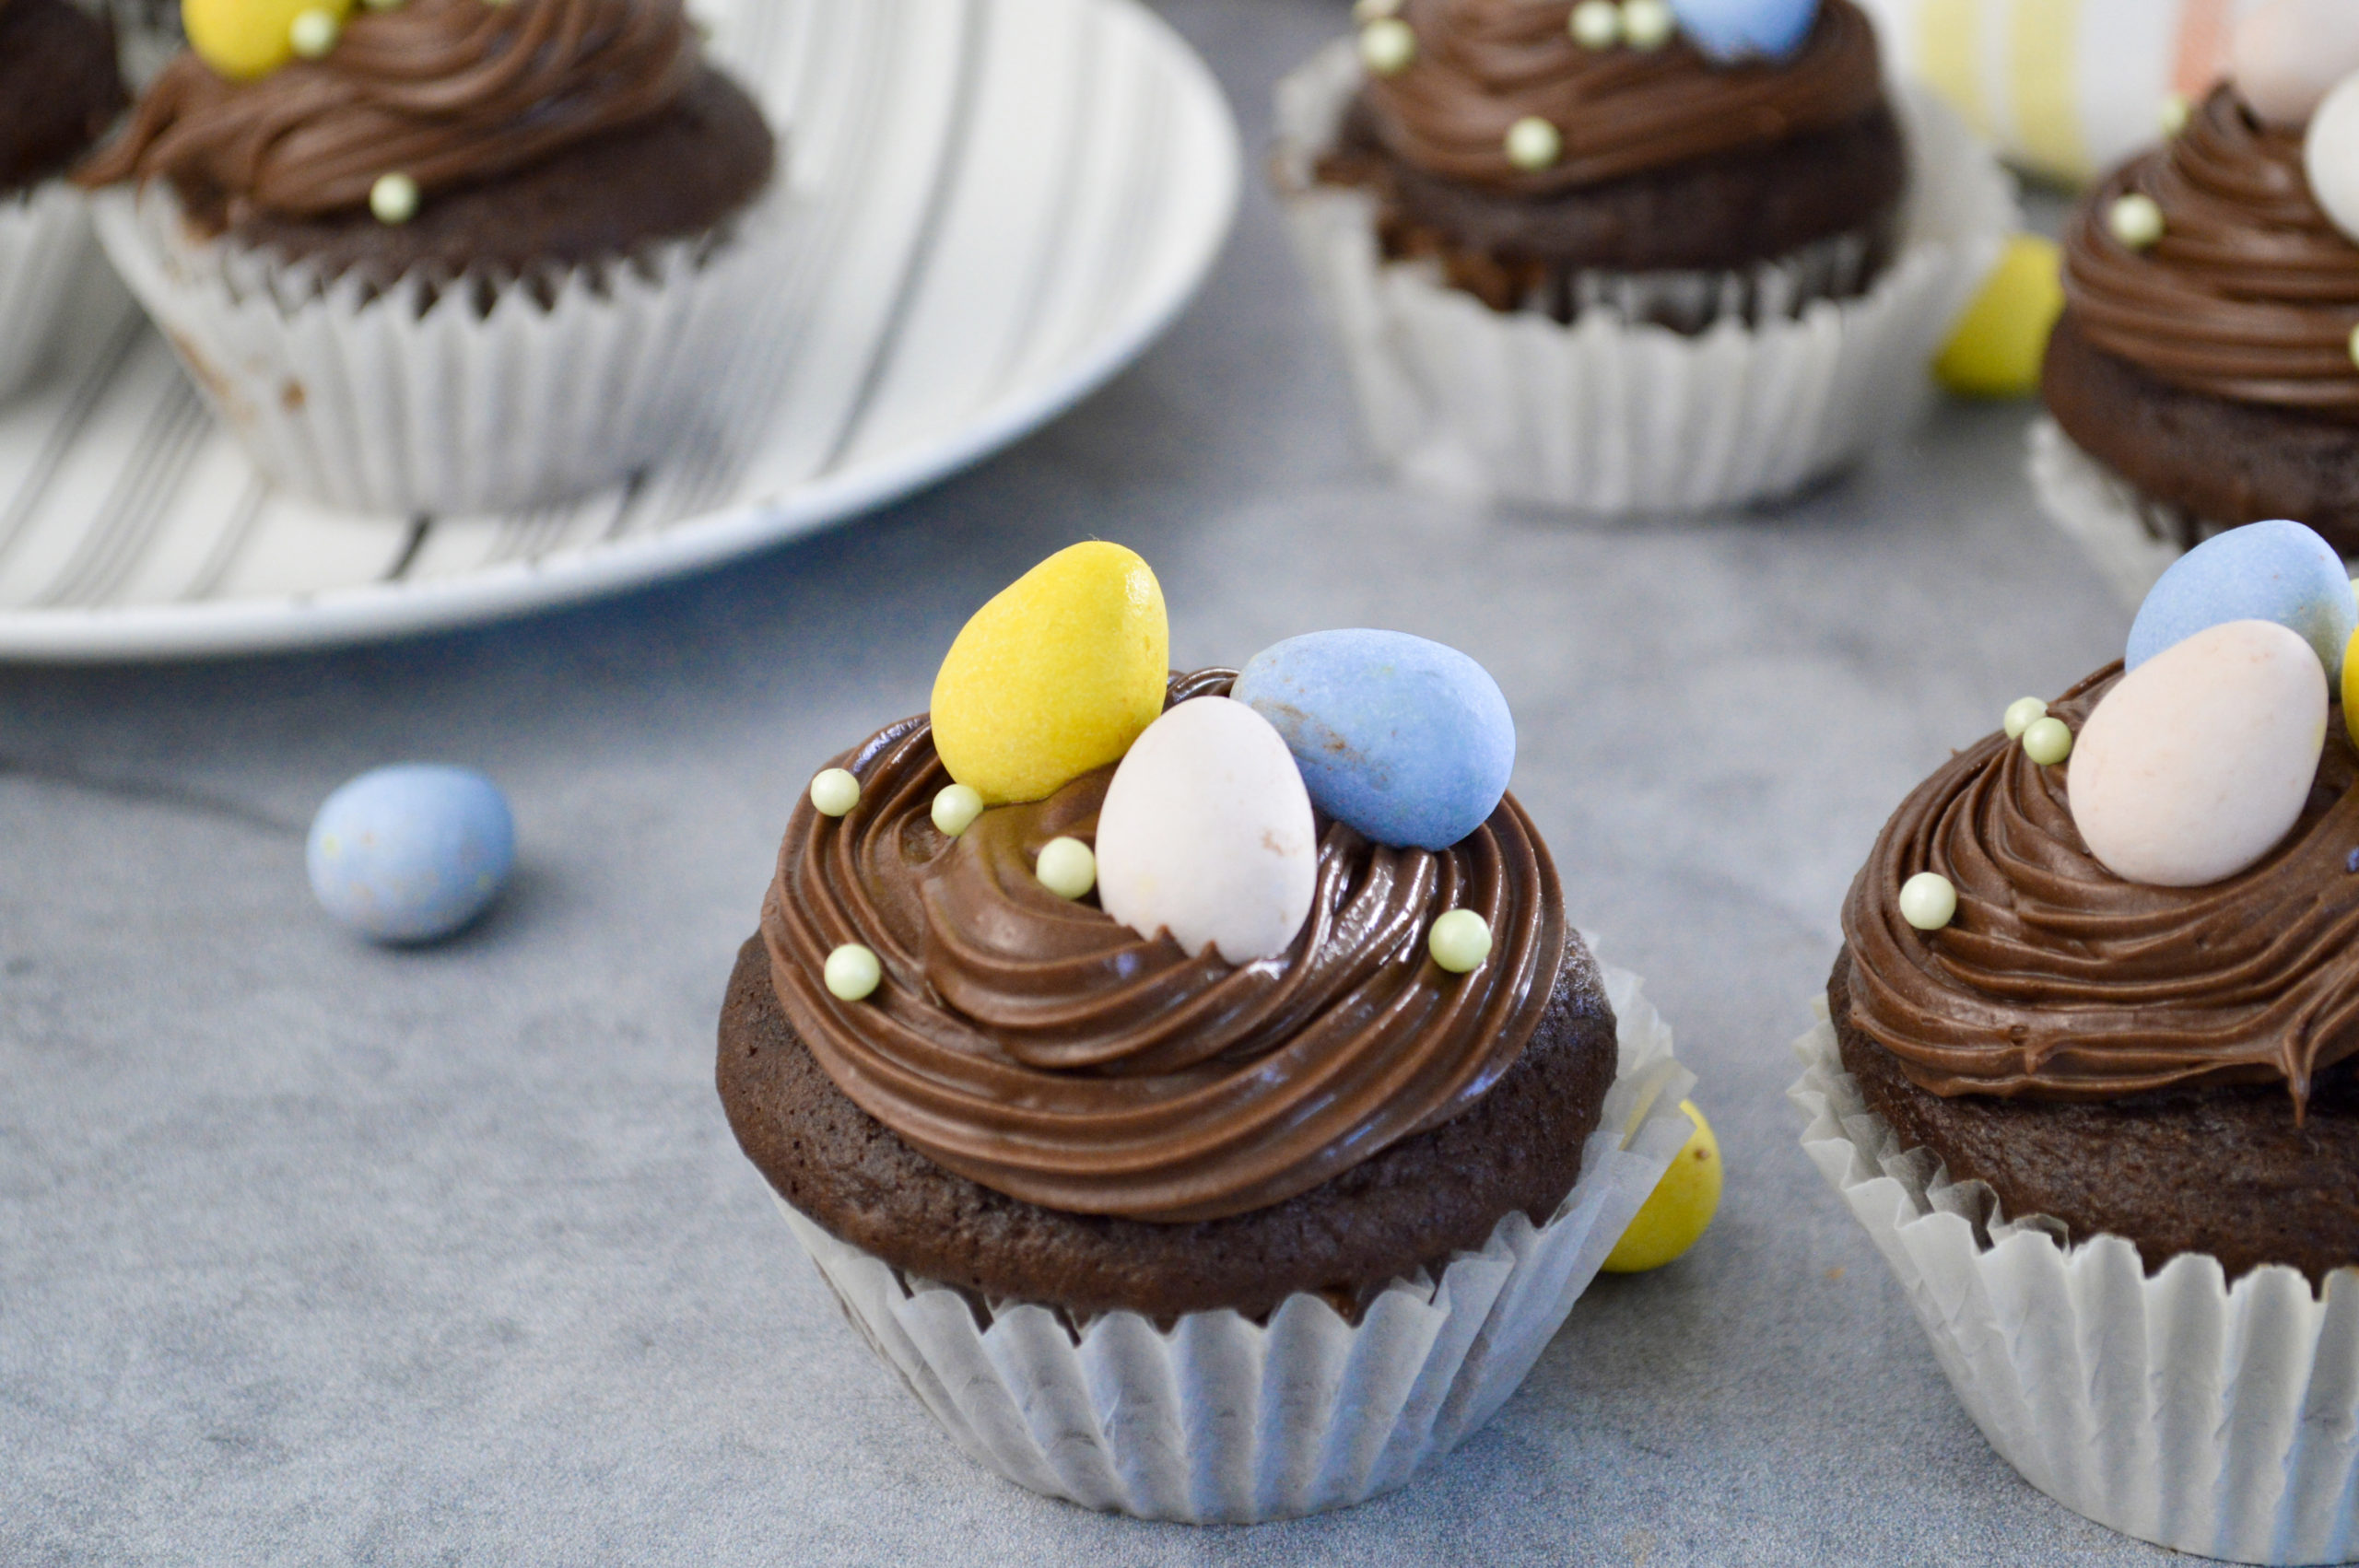 Chocolate Easter Cupcakes with Chocolate Cream Cheese frosting 